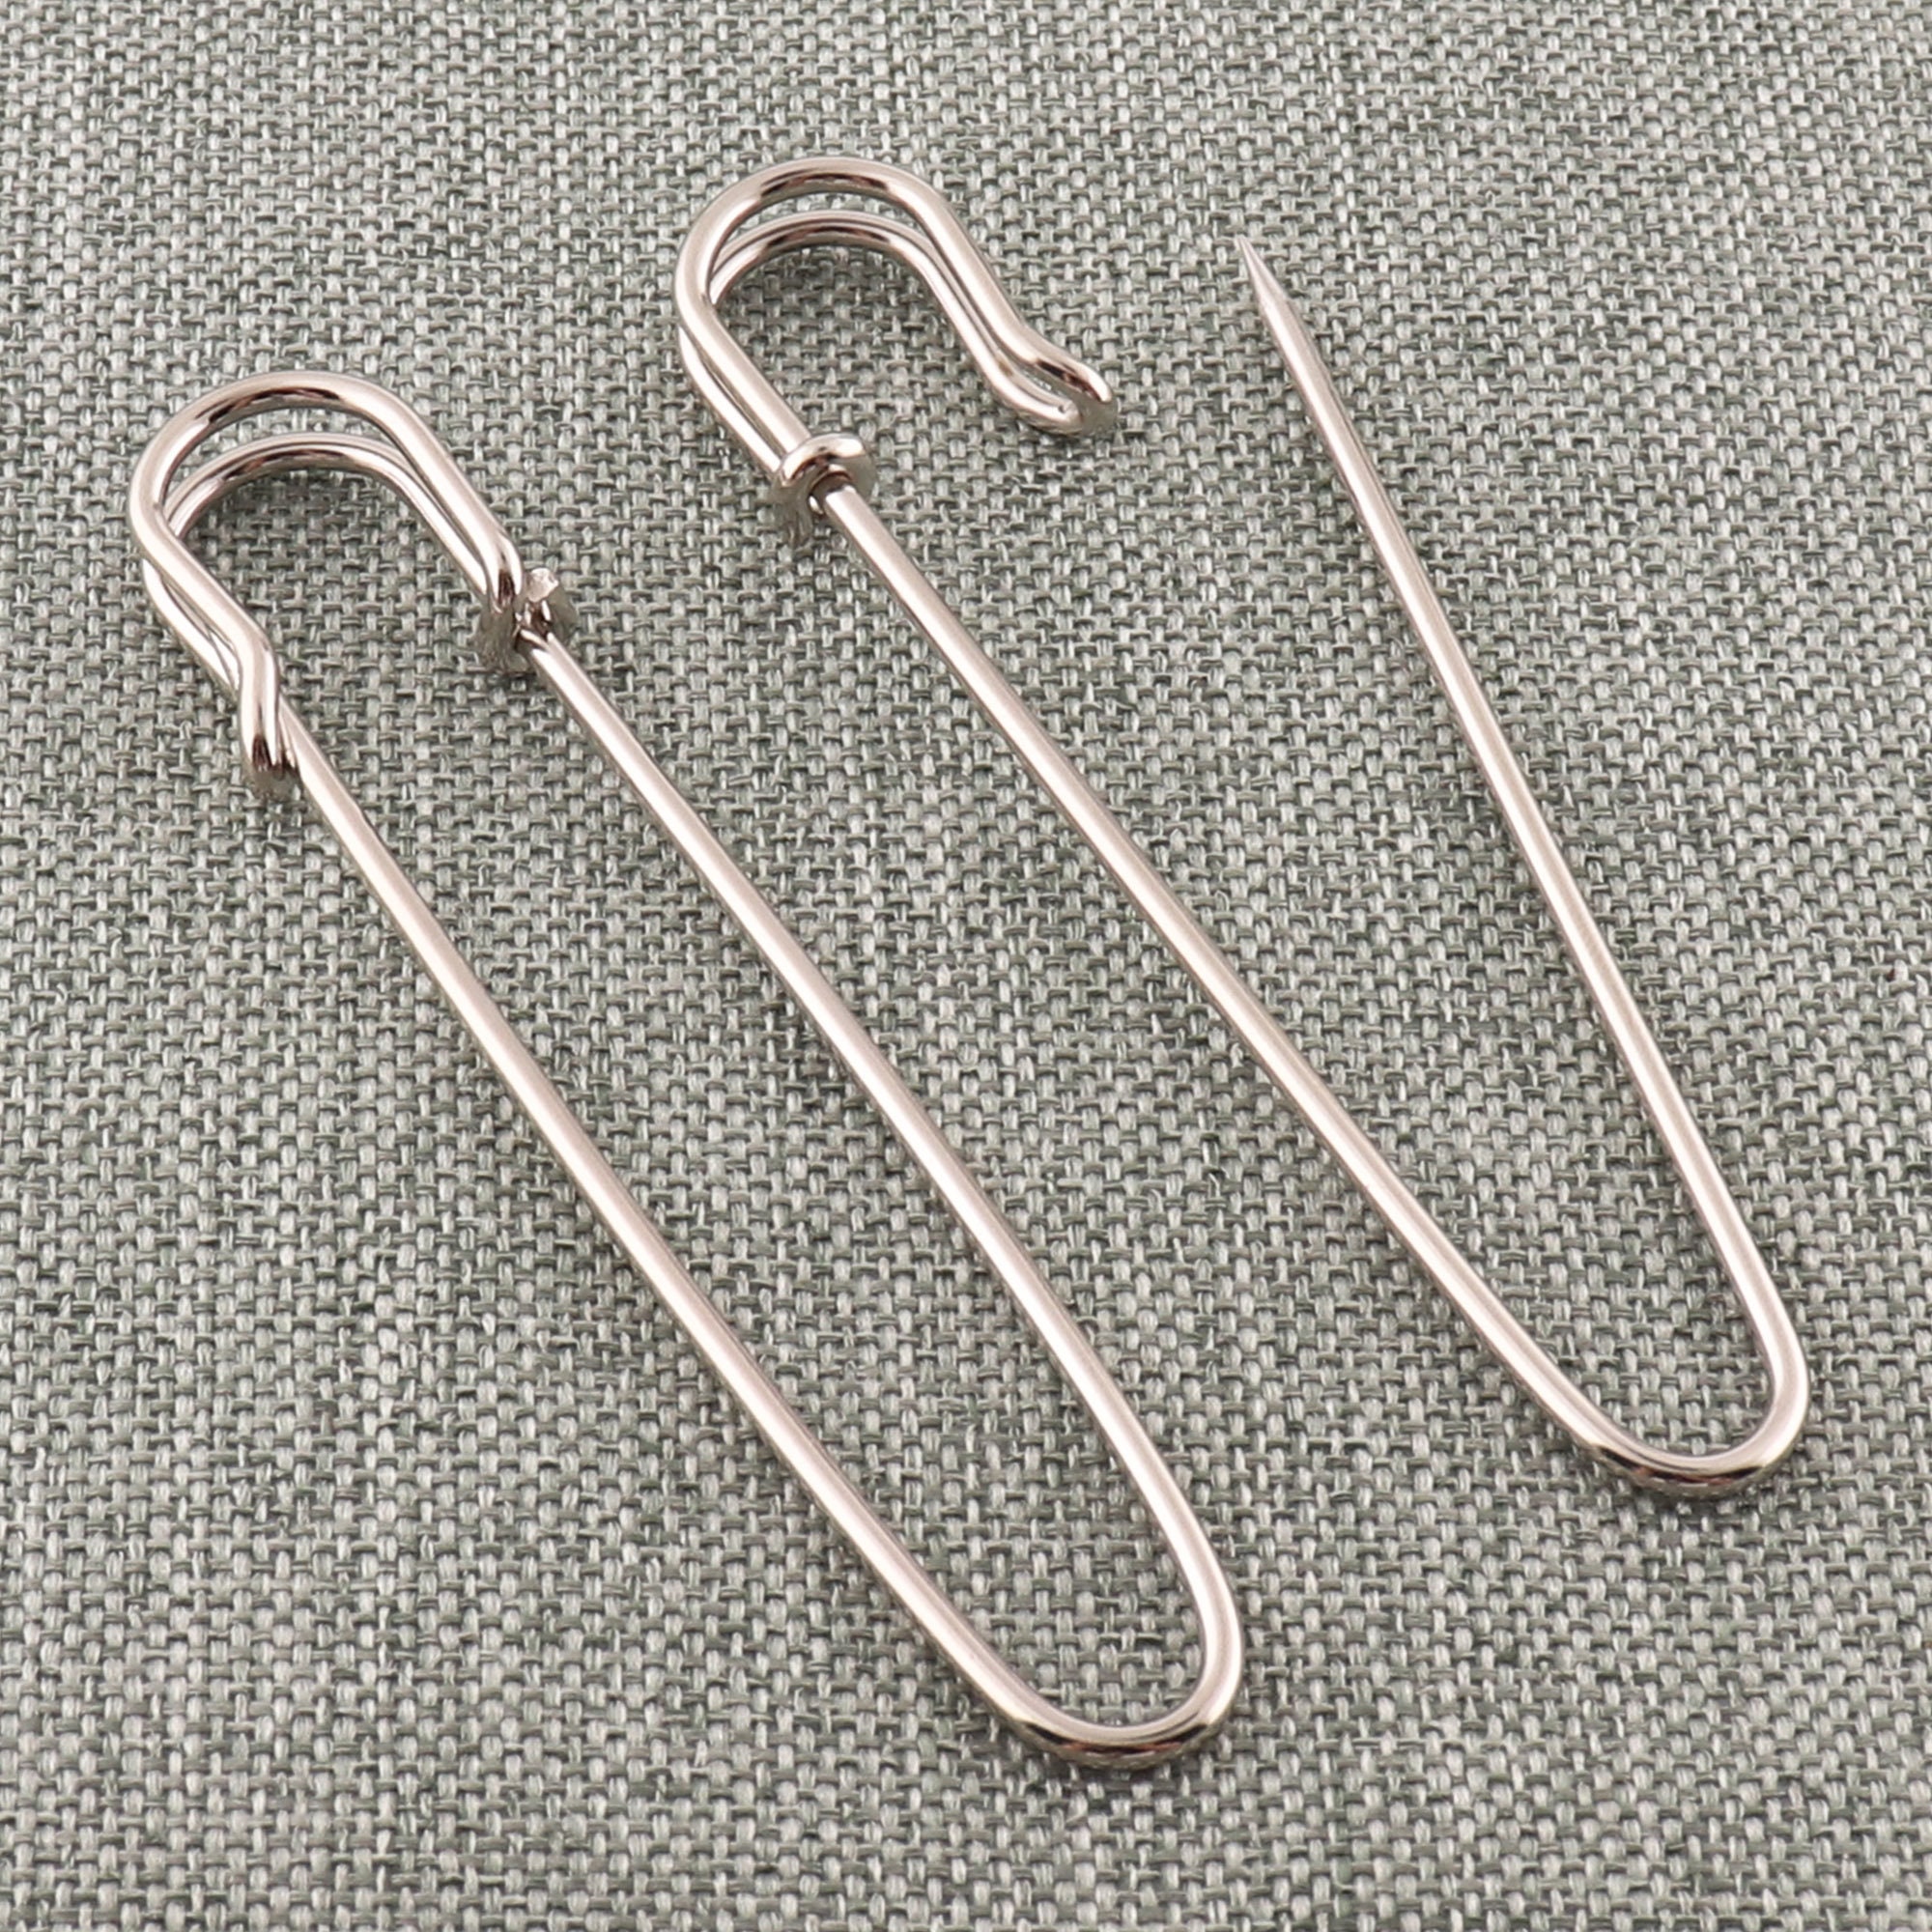 Silver Safety pins Coiless Safety Pins Larger Safety Pins Kilt Pins Broochs  Letter Bar Pins Apparel Accessories DIY Sewing 4pcs 80mm